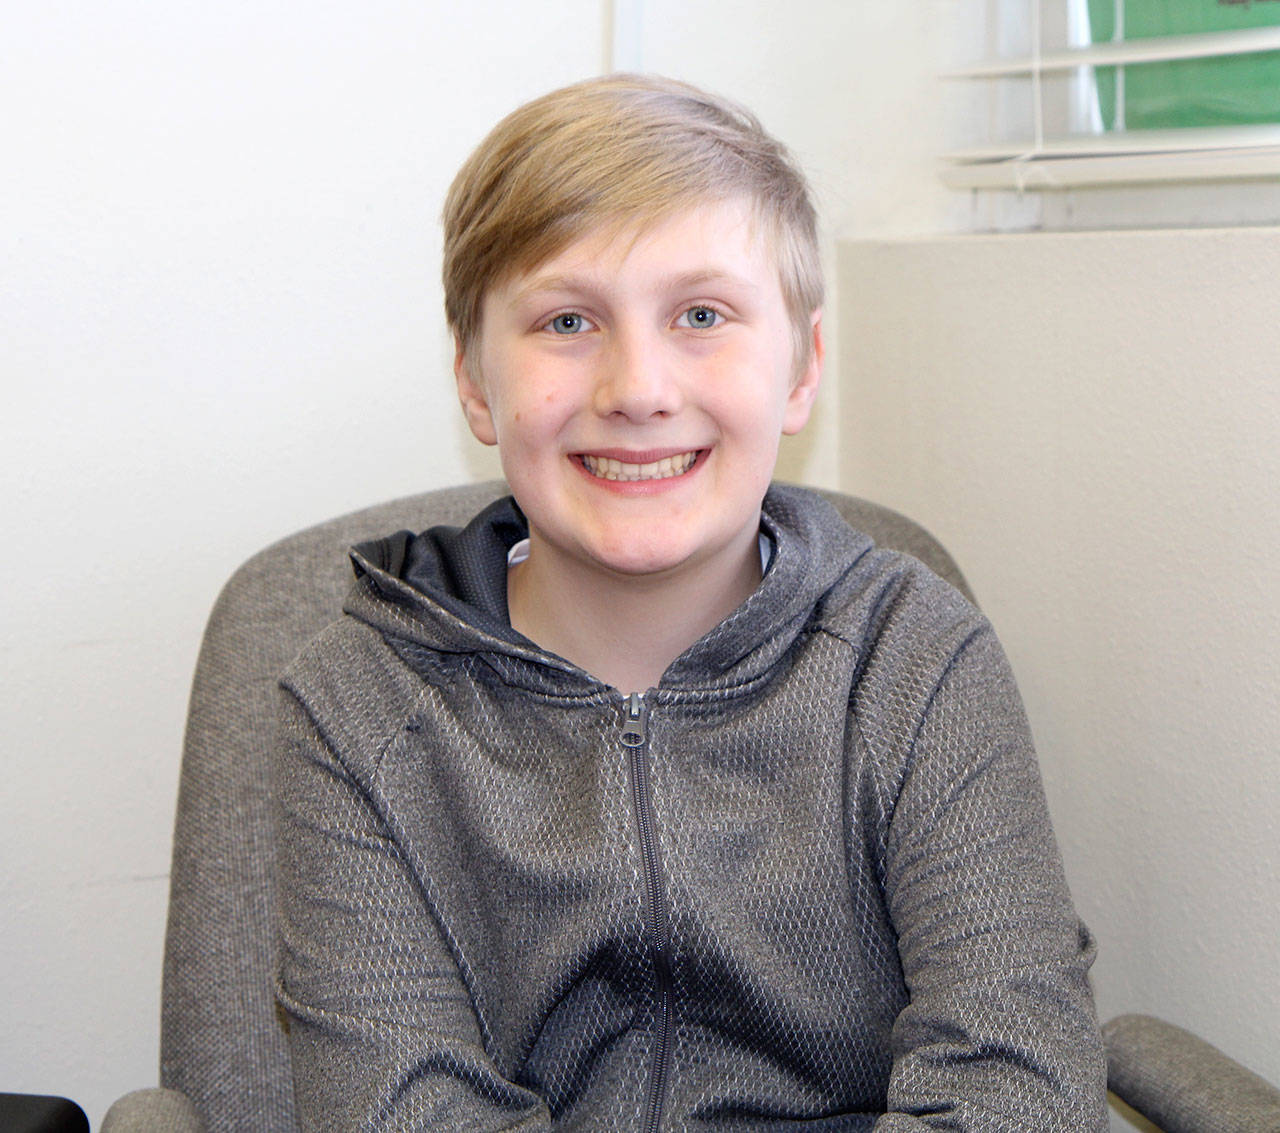 Montesano student qualifies for state geography competition